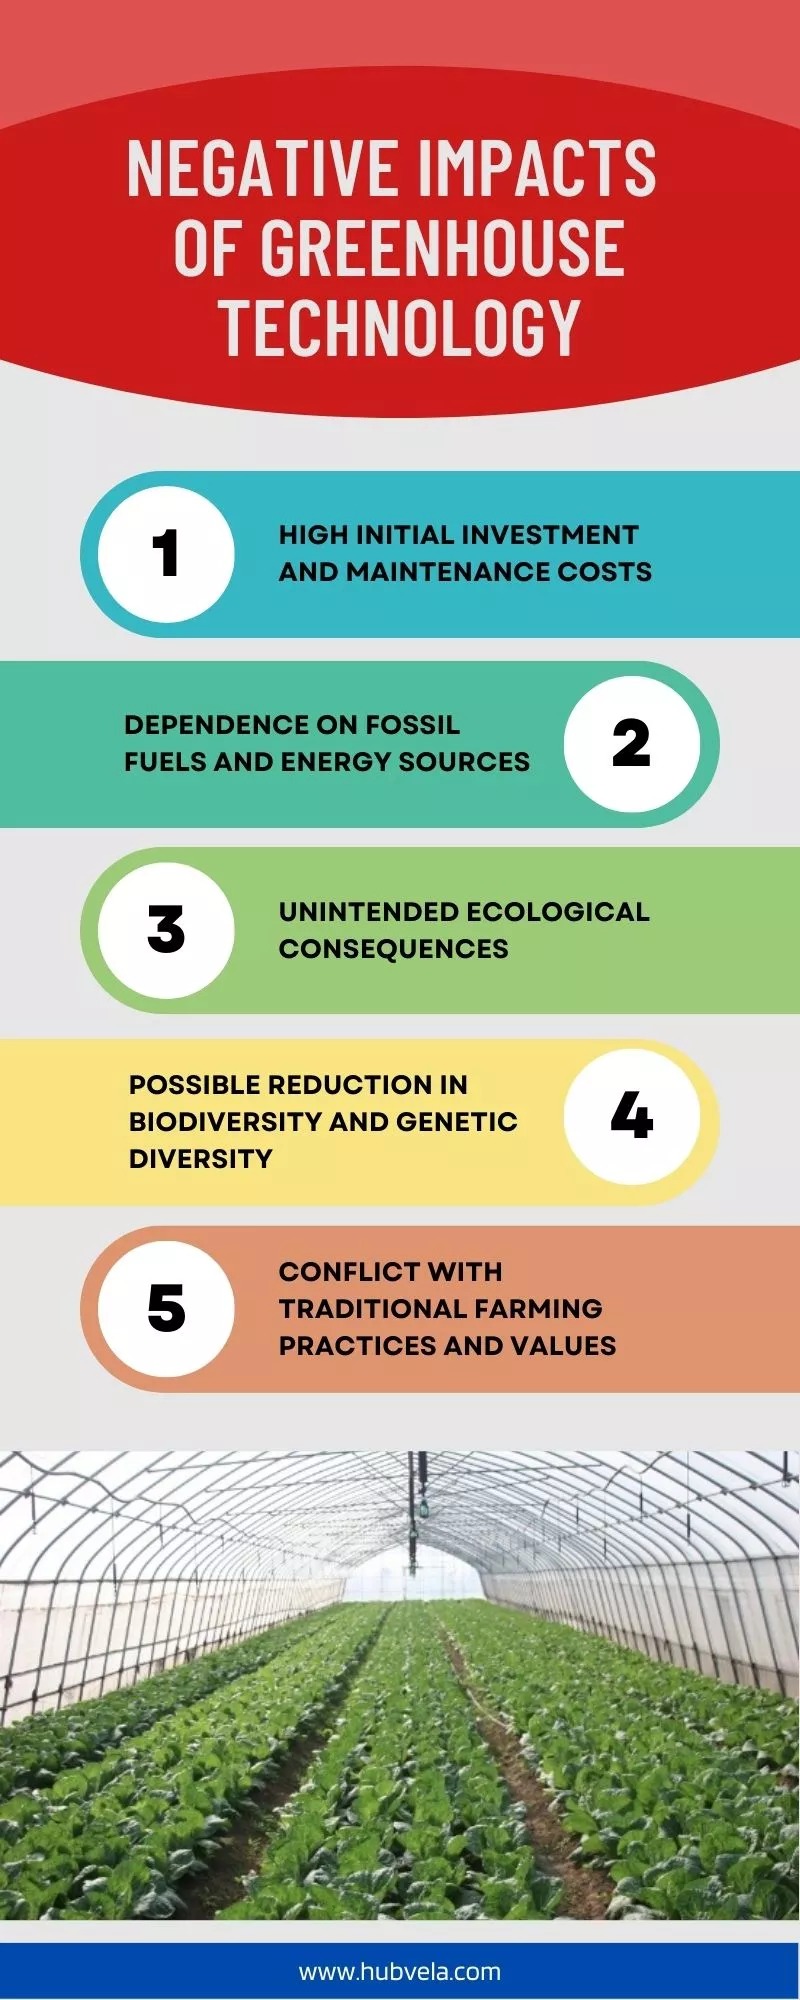 Negative Impacts of Greenhouse Technology infographic